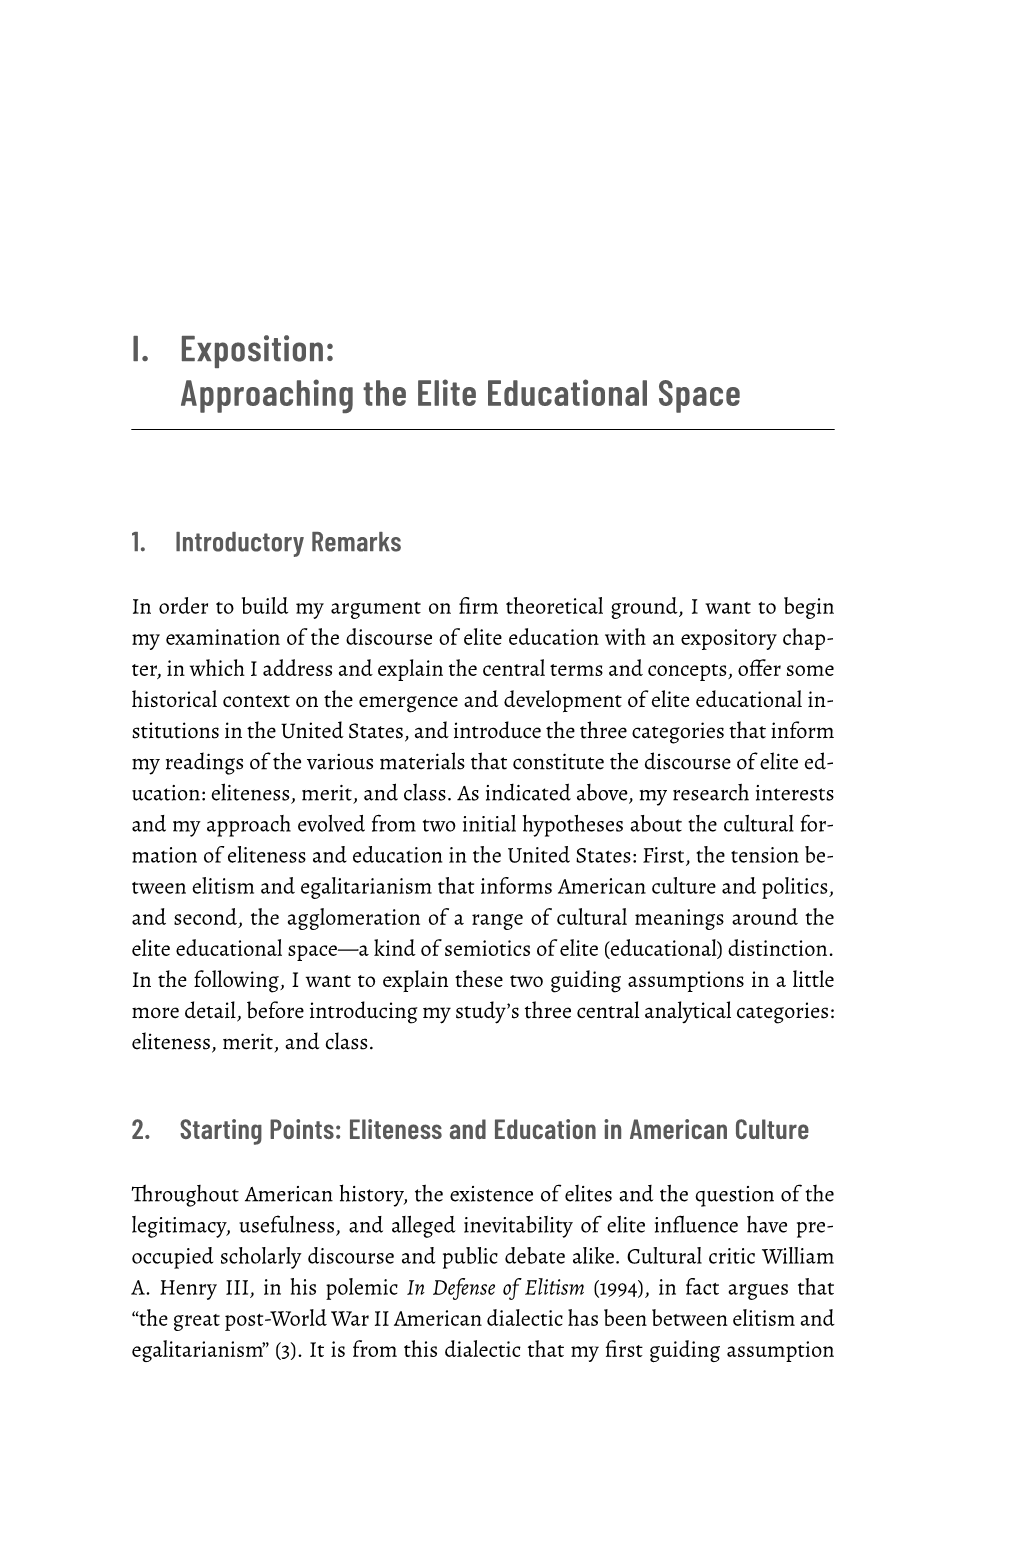 I. Exposition: Approaching the Elite Educational Space